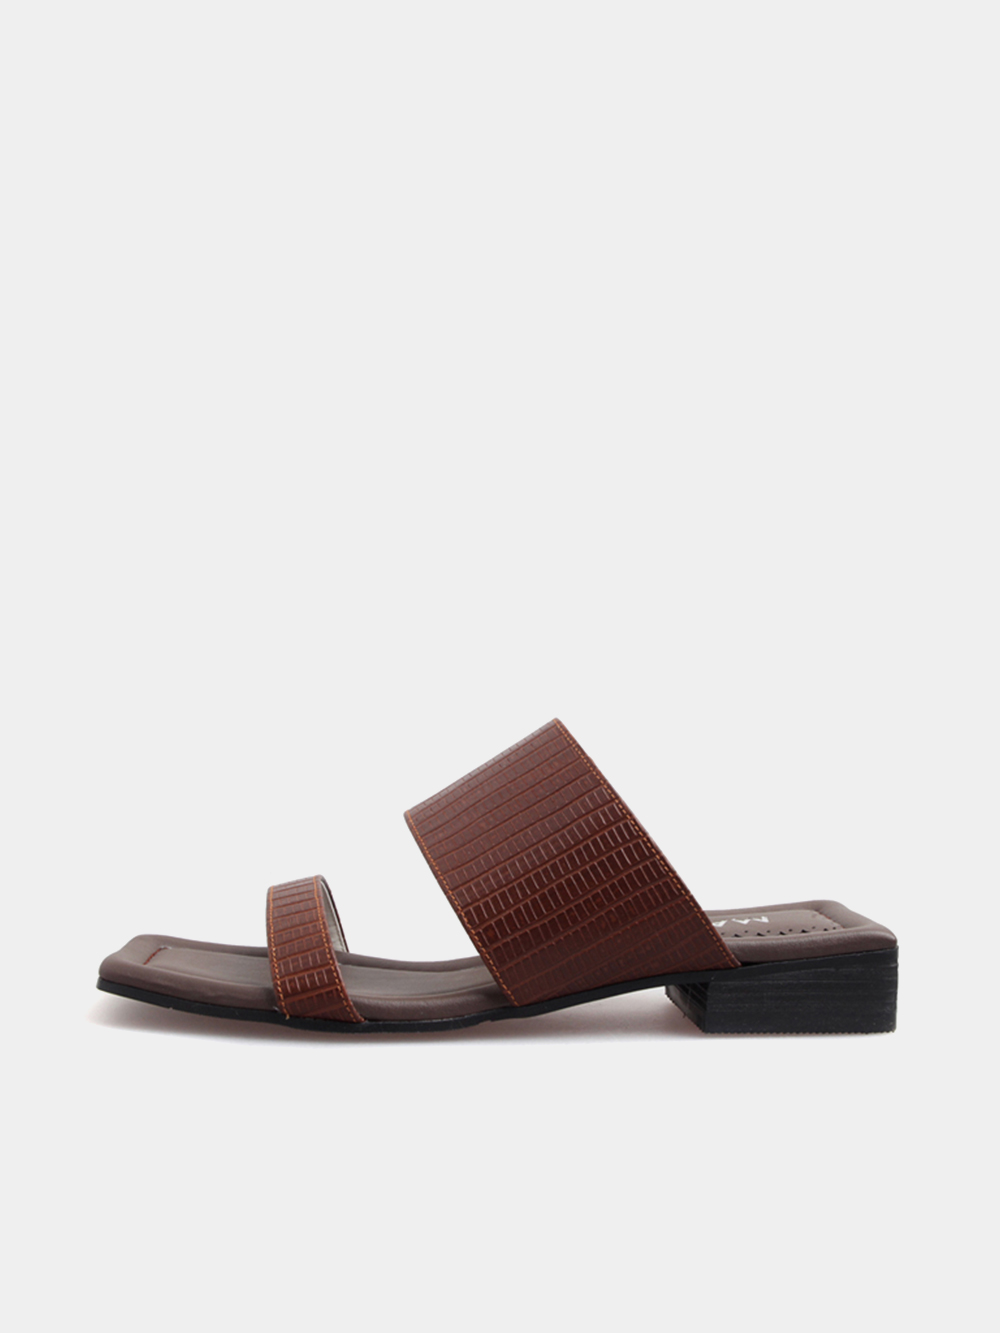 [Out of stock] Mrc03s Urban Flat Sandal (Brown Crack)